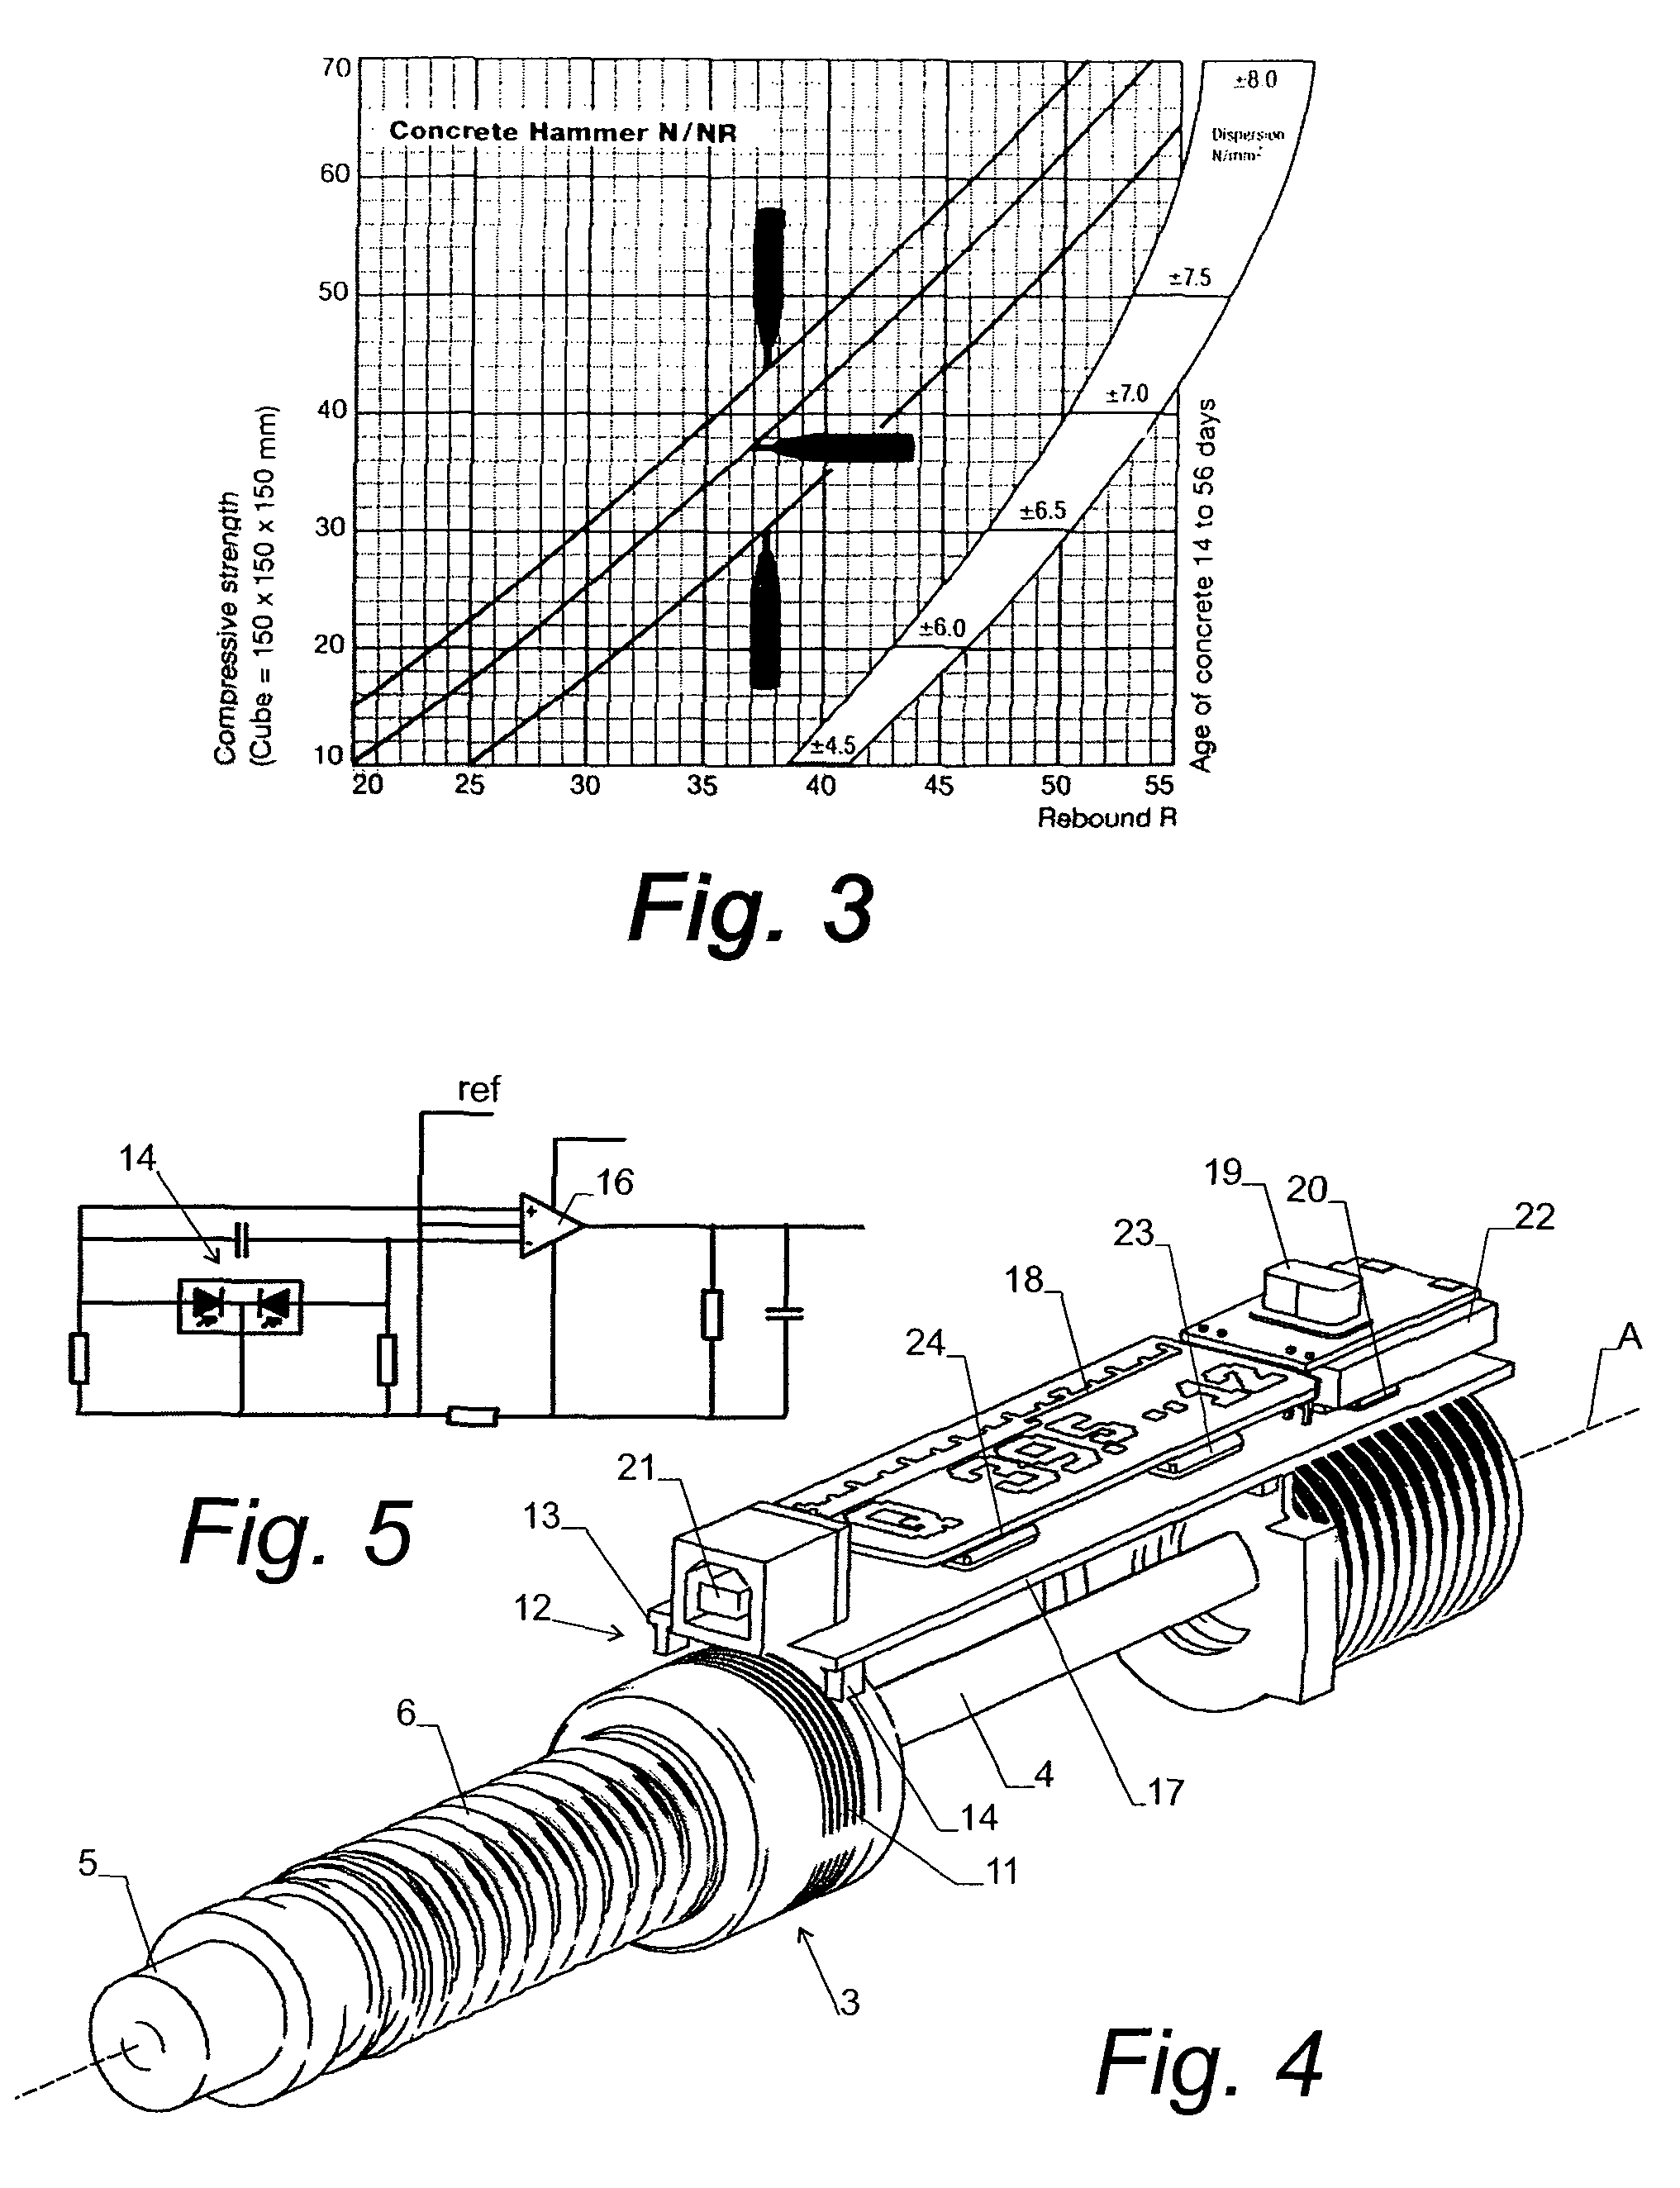 Method and apparatus for the non-destructive measurement of the compressive strength of a solid